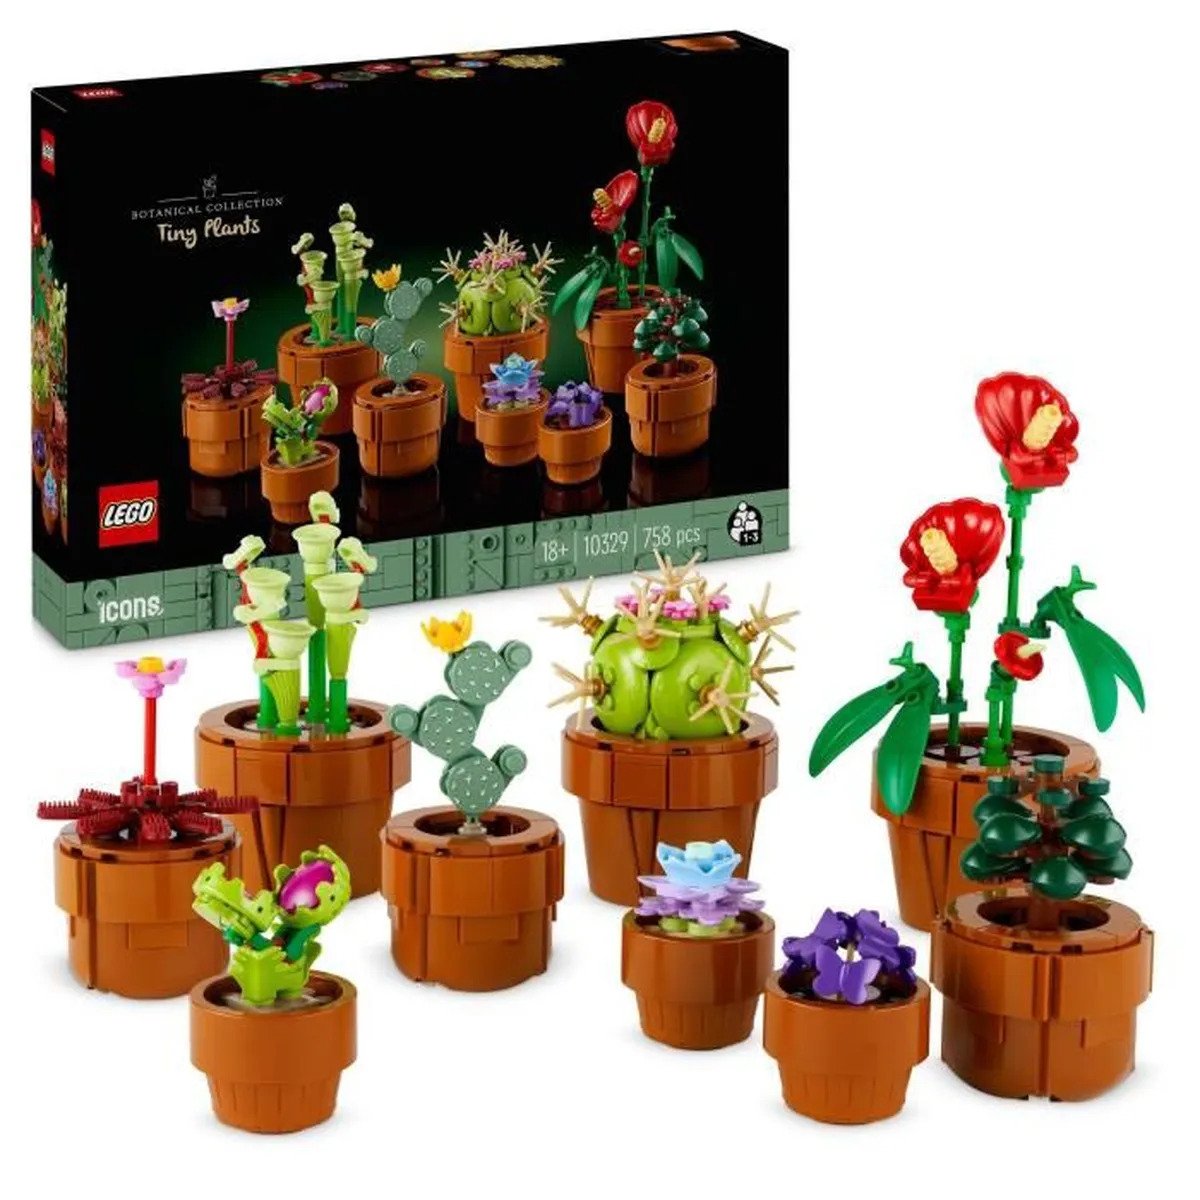 LEGO Icons Botanical Collection Tiny Plants (10329) First Look - The Brick  Fan